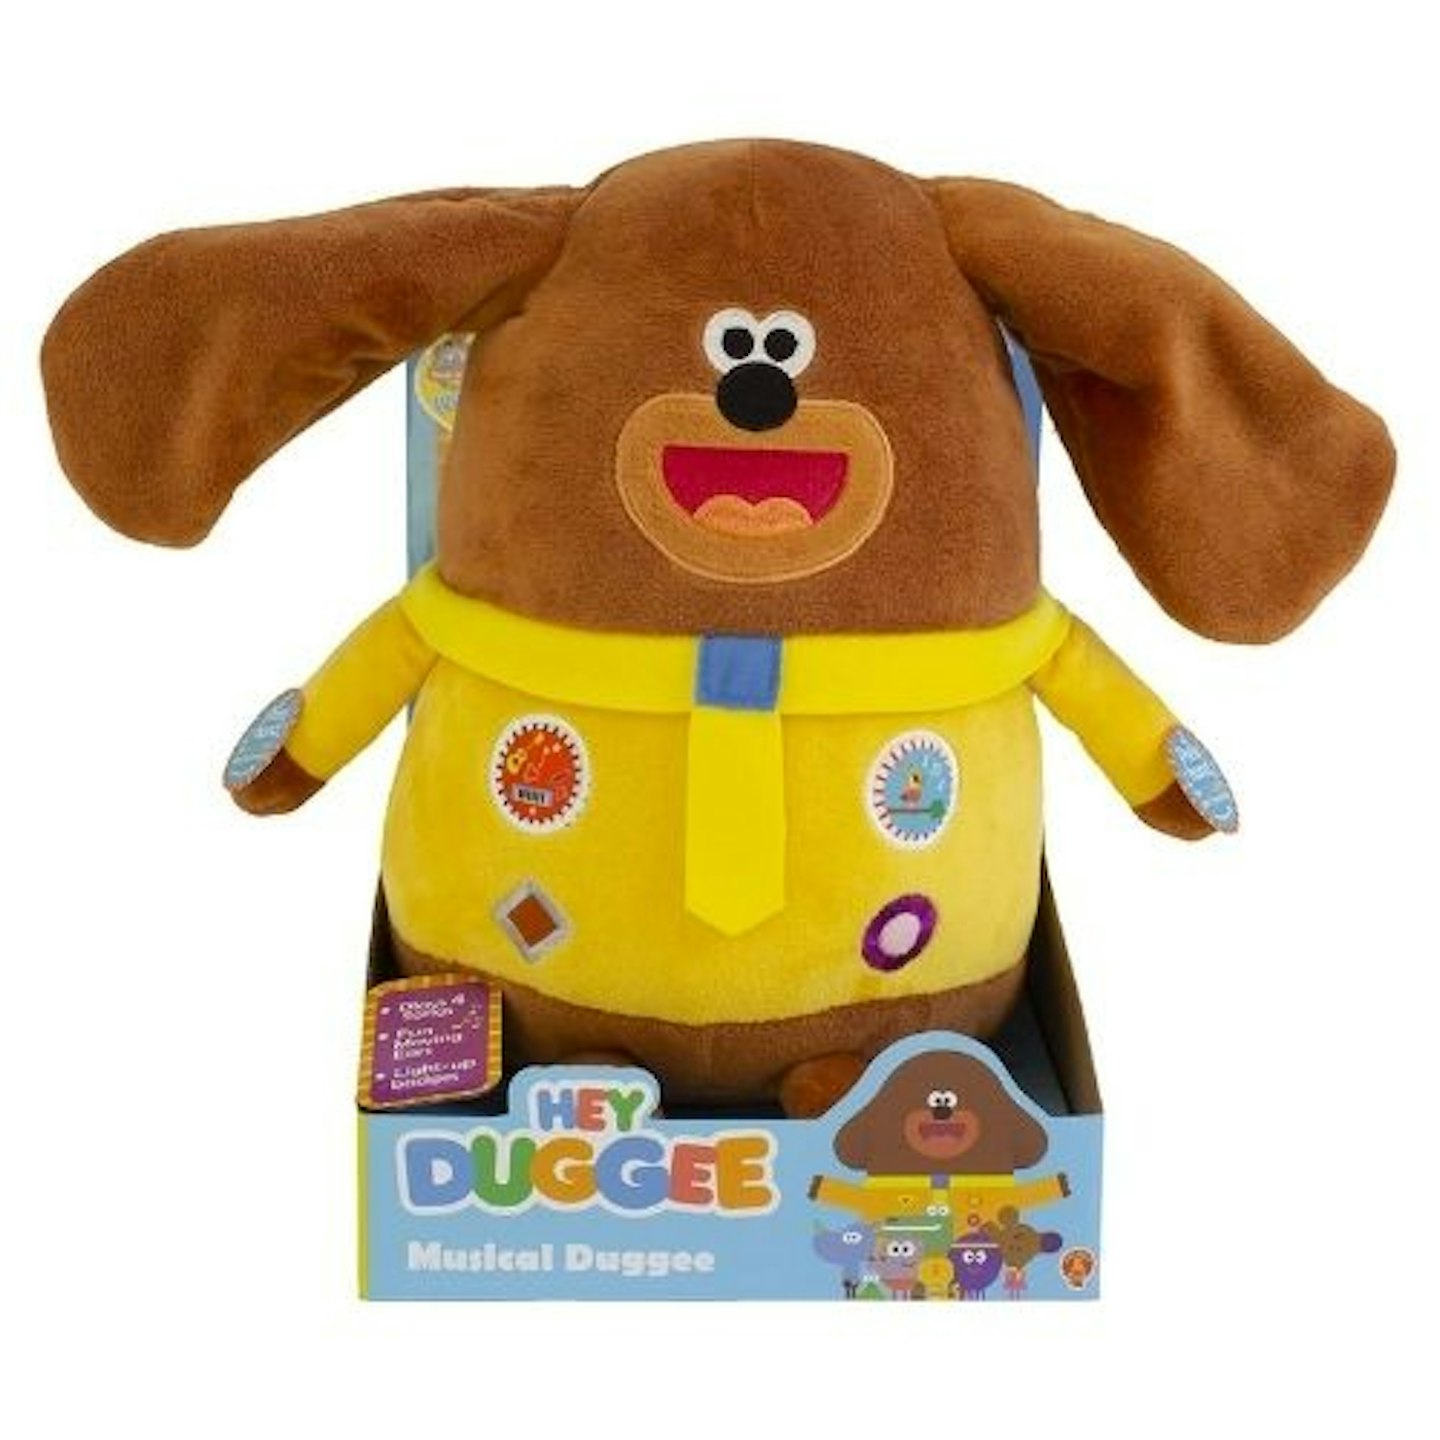 Hey Duggee Musical Duggee Soft Toy - musical toys for toddlers